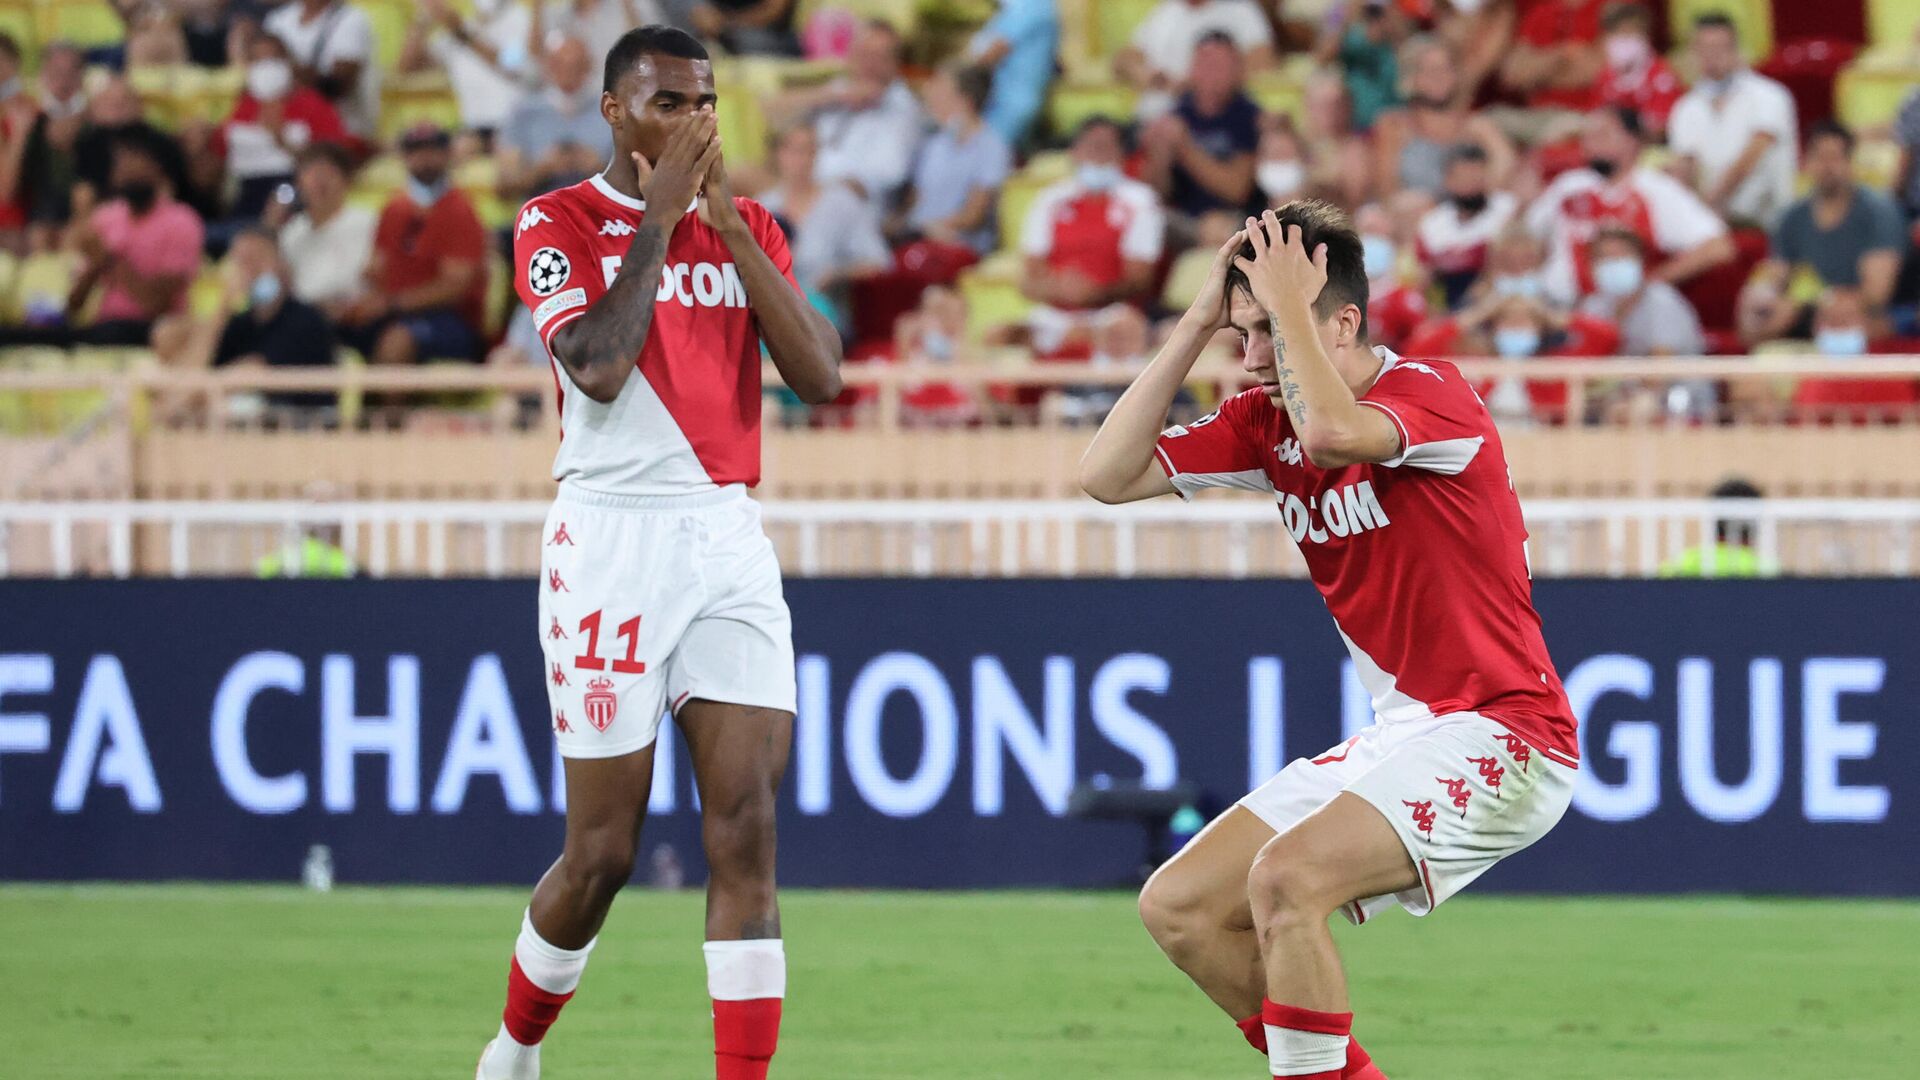 Monaco's Russian midfielder Aleksandr Golovin (R) and Monaco's Brazilian midfielder Jean Lucas De Souza Oliveira react during their UEFA Champions League third preliminary round football match between AS Monaco and FC Chakhtar Donetsk at Louis II stadium in Monaco, on August 17, 2021. (Photo by Valery HACHE / AFP) - РИА Новости, 1920, 17.08.2021